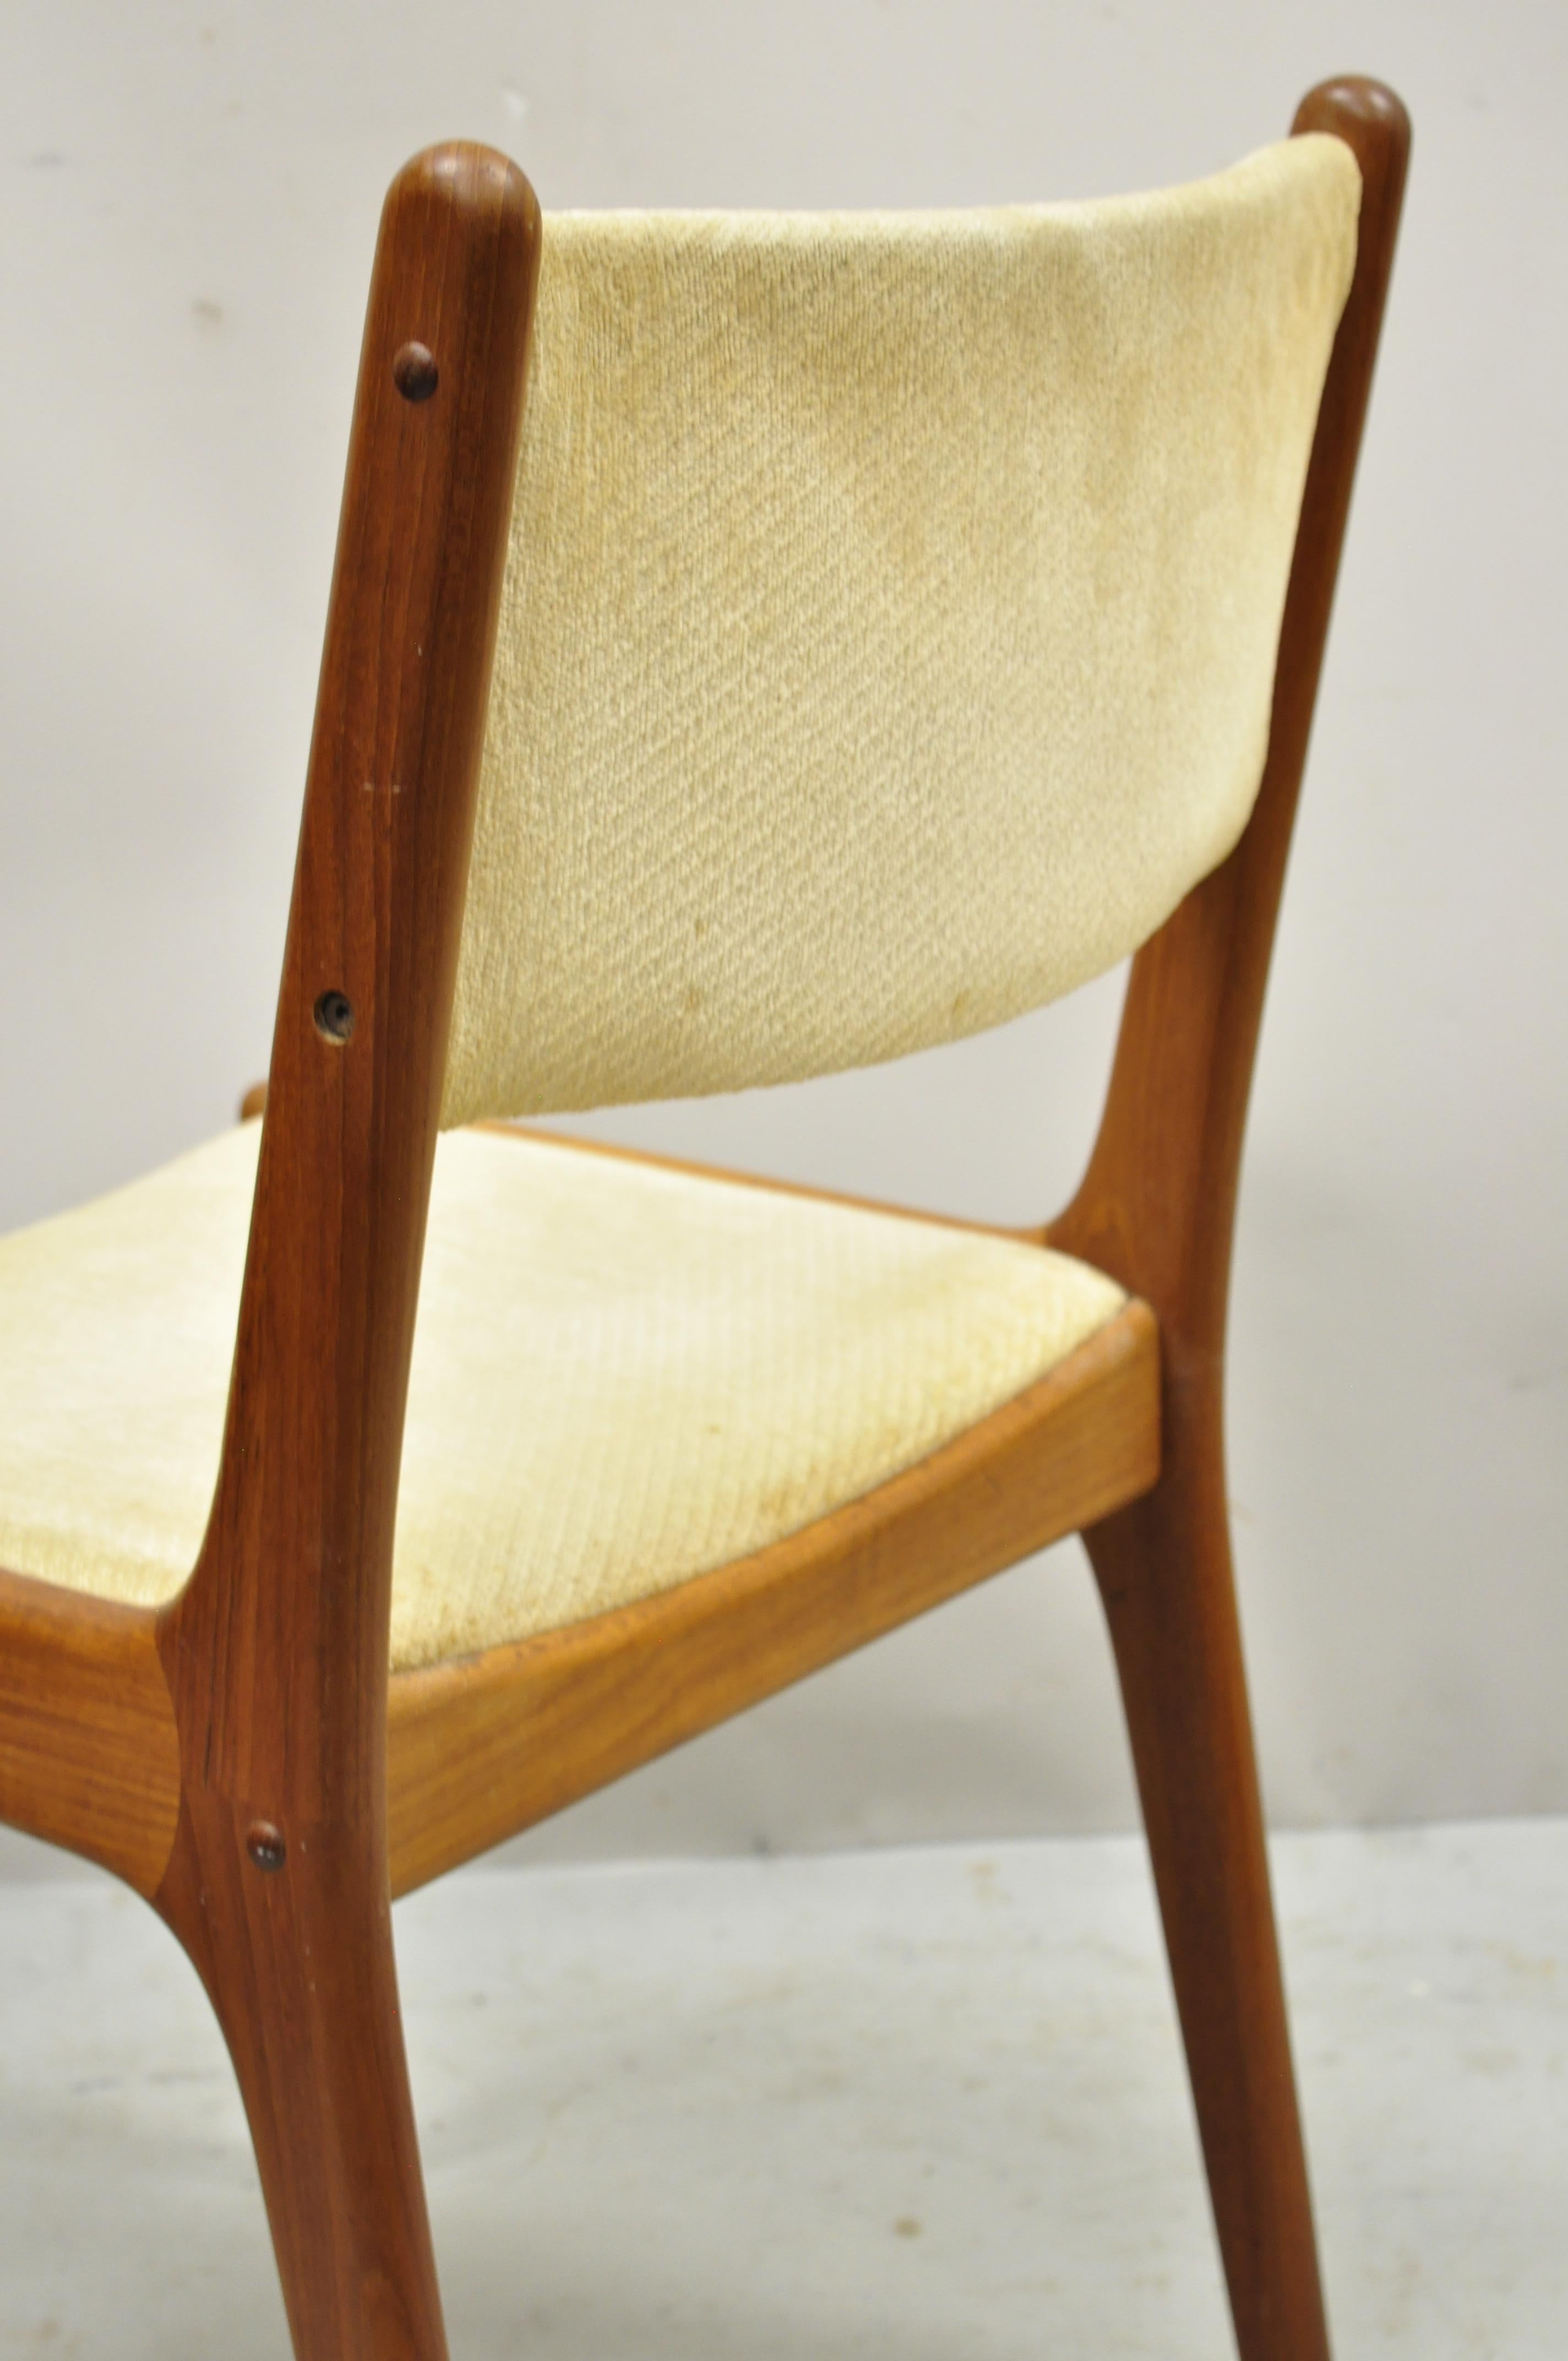 Vintage Mid-Century Modern Danish Style Teak Wood Dining Chair by Sun Furniture In Good Condition For Sale In Philadelphia, PA